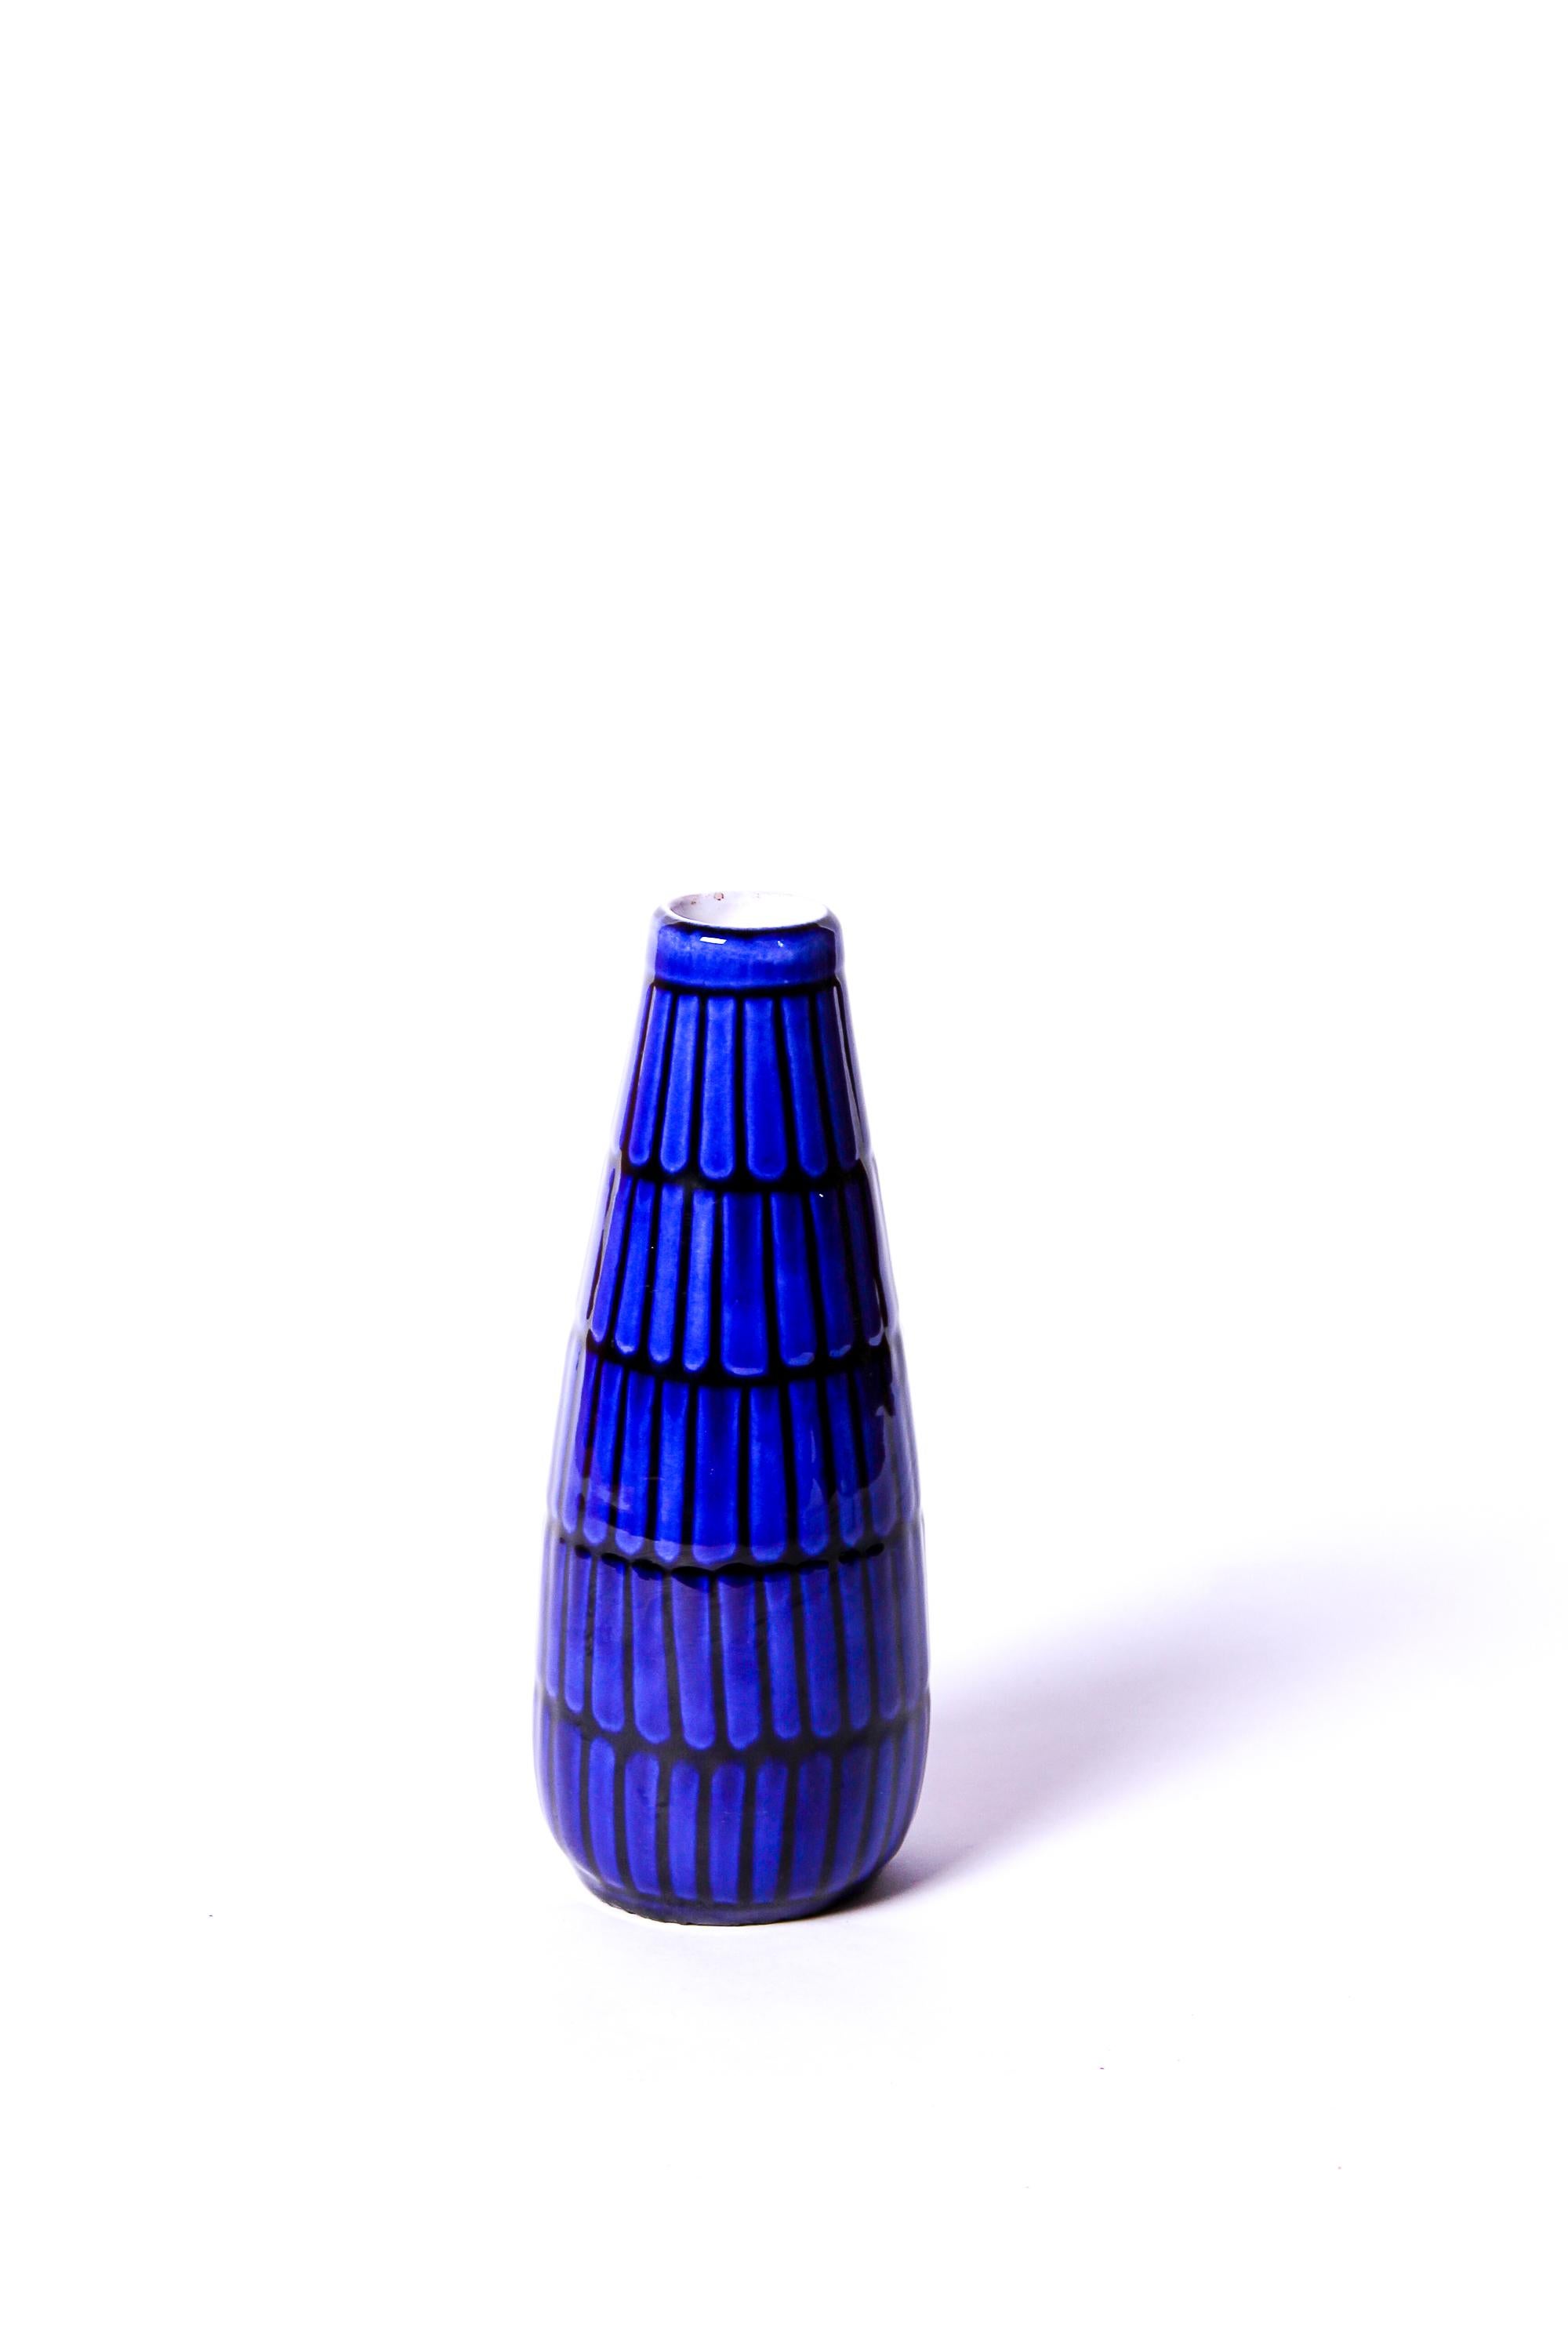 A very decorative blue ceramic vase designed by Swedish designer Ingrid Atterberg. The vase has a wonderful blue glaze and was produced at Upsala-Ekeby in Sweden around 1950.

Very good vintage condition.